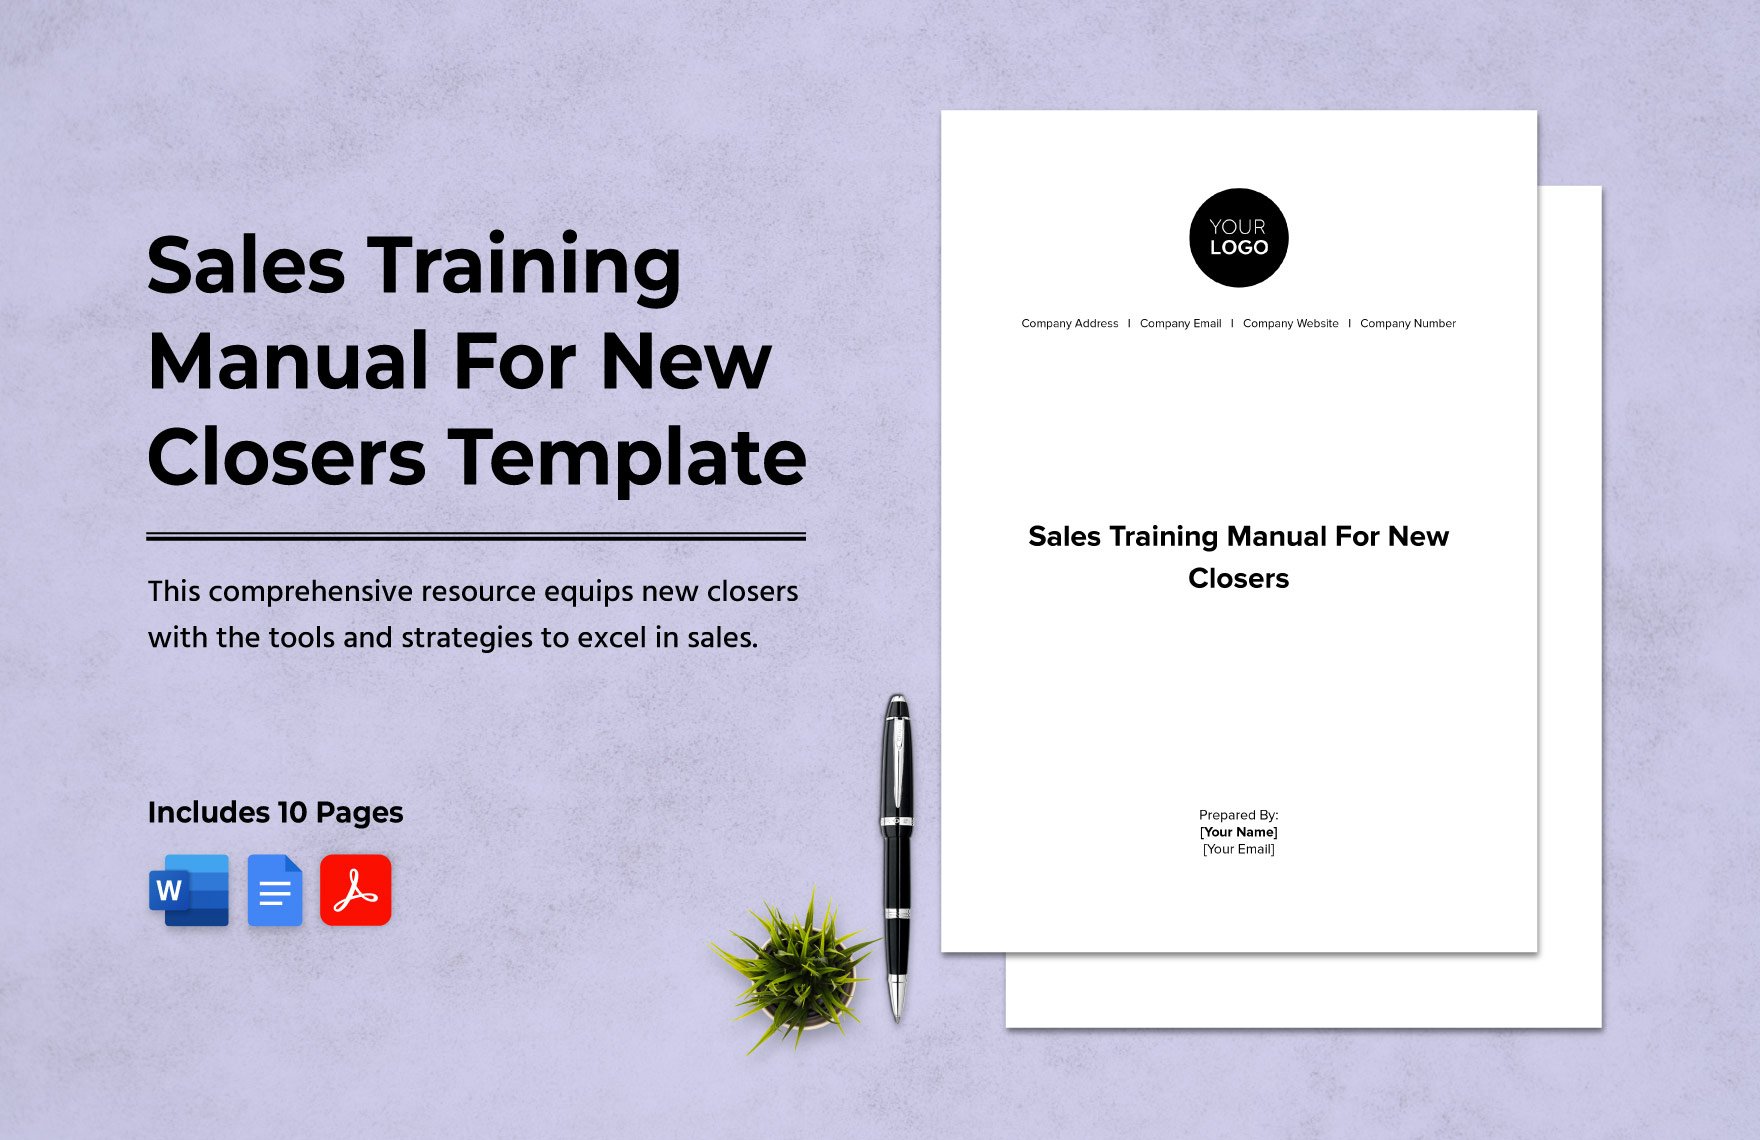 Sales Training Manual For New Closers Template